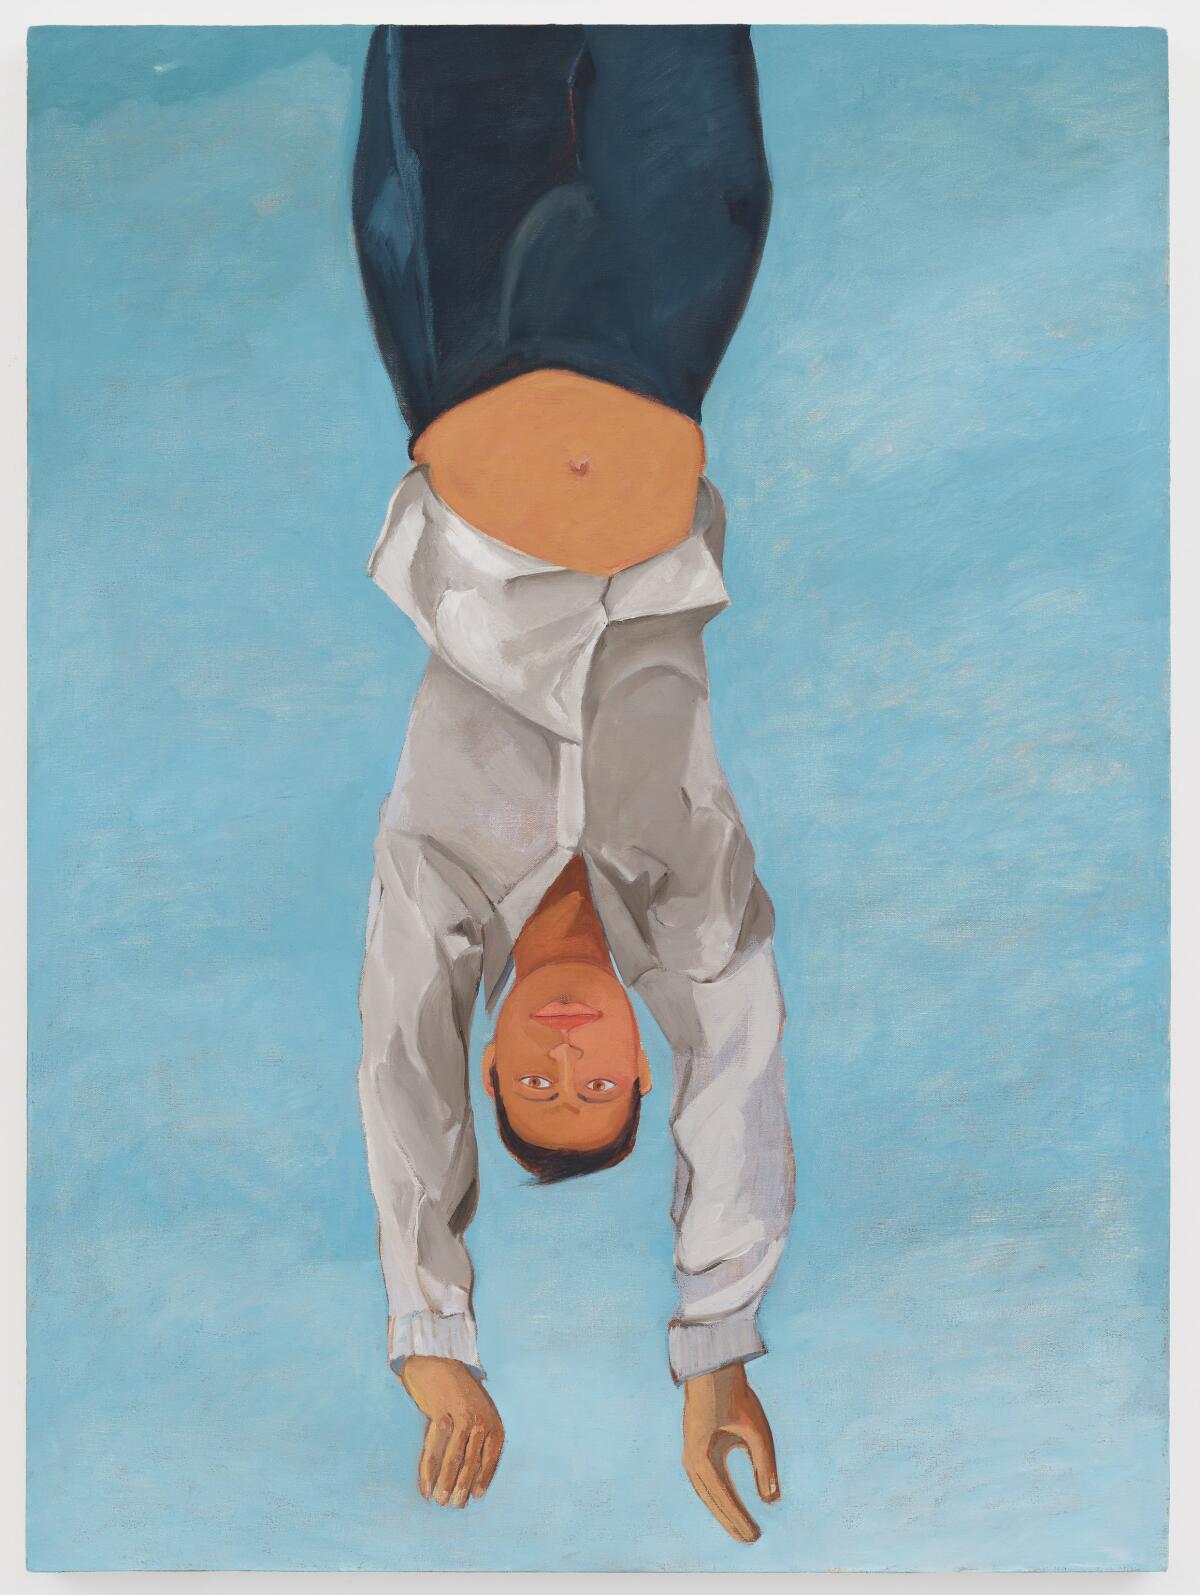 A large painting shows a man in a white shirt hanging upside down against a sky blue background